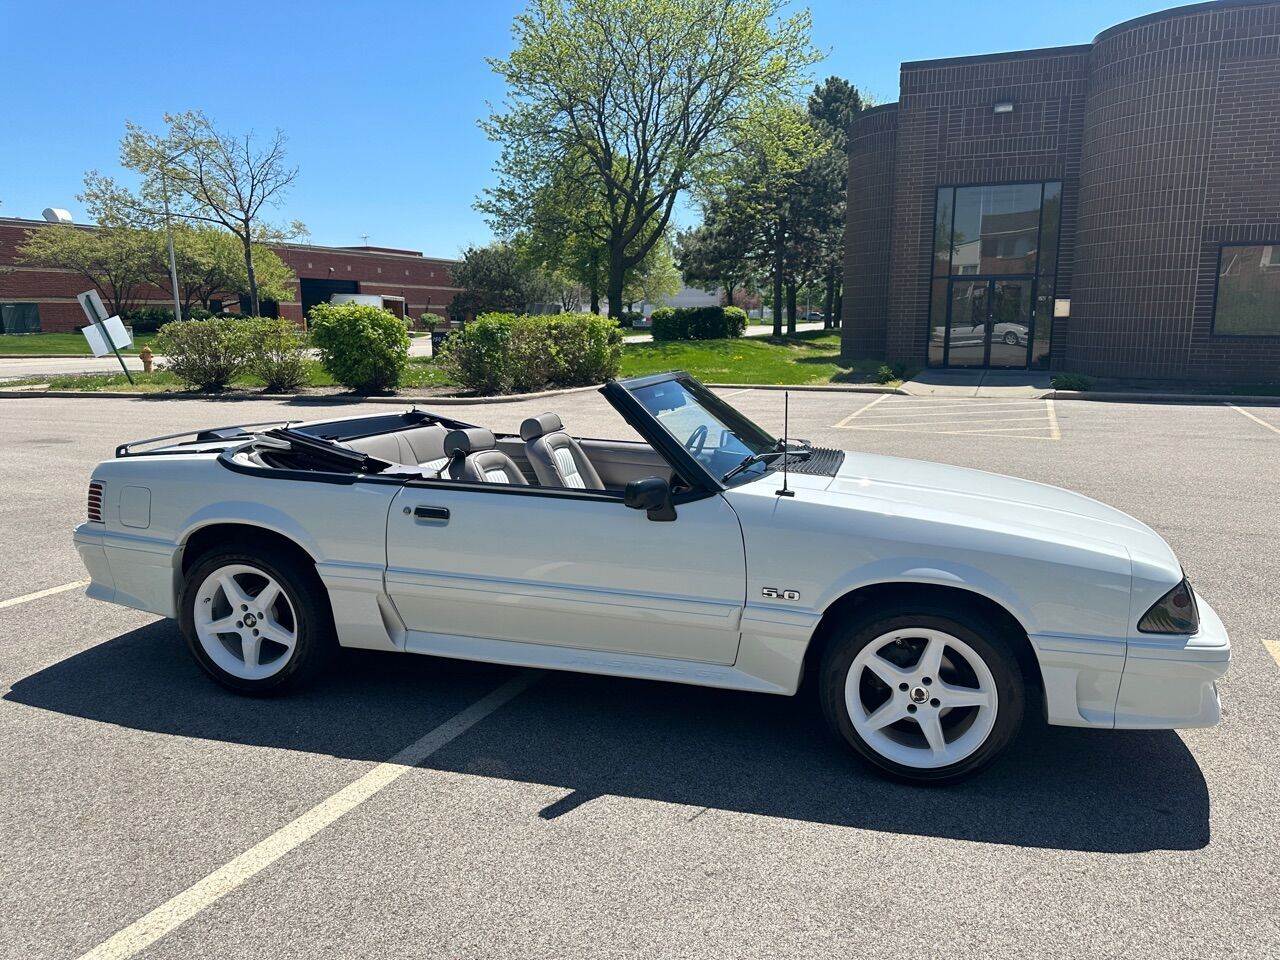 1992 Ford Mustang 12